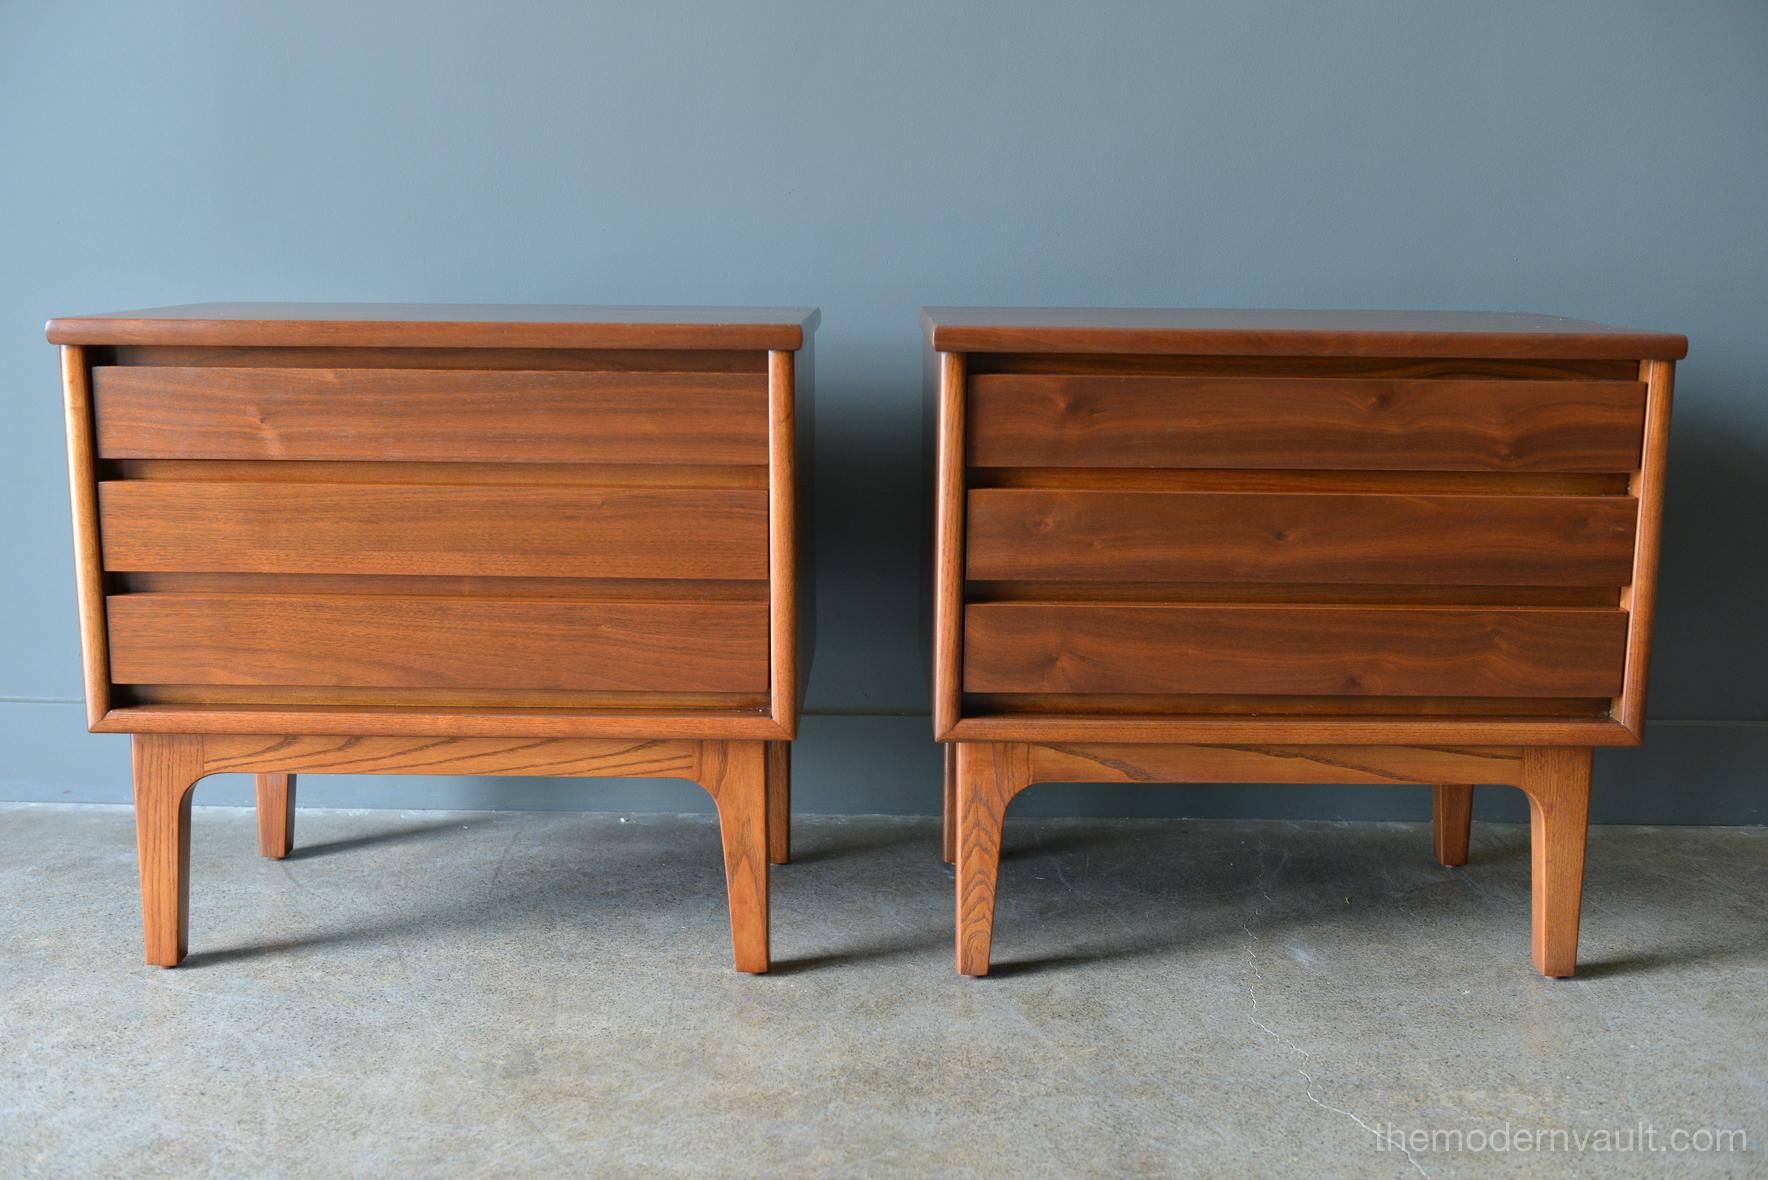 Pair of walnut nightstands or end tables, circa 1960 by Stanley Furniture. Beautiful grained American black walnut with dovetail drawers and solid walnut base. One large drawer and one smaller drawer open for plenty of storage. Professionally